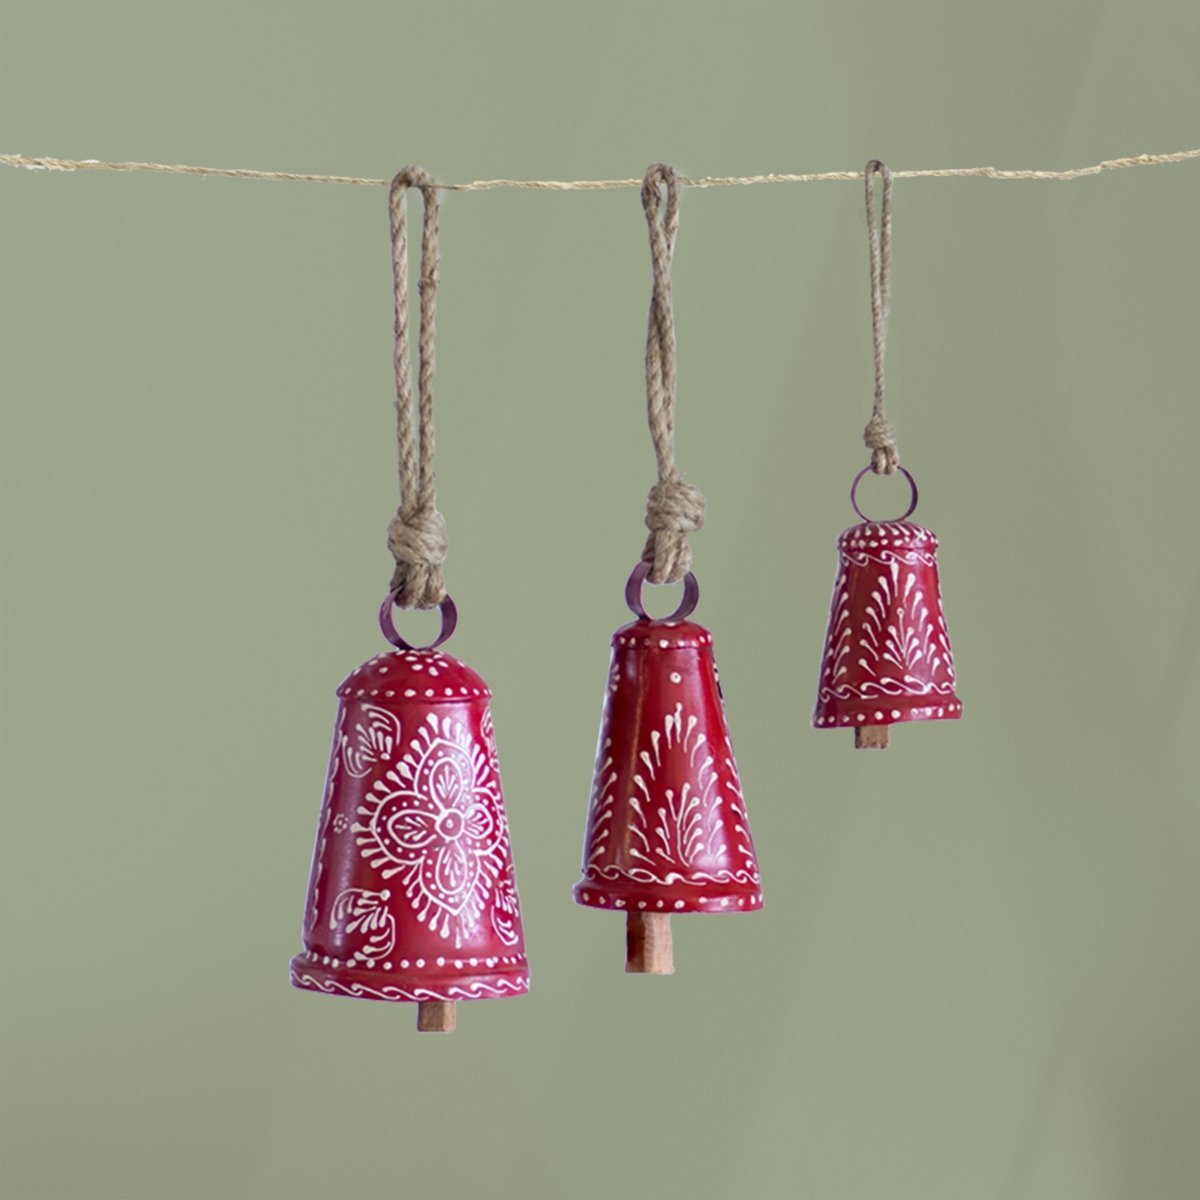 Kezevel Handmade Metal Hanging Bells - Set of 3 Red and White Antique Wind Chimes with Rope for Home Garden Decor, Balcony